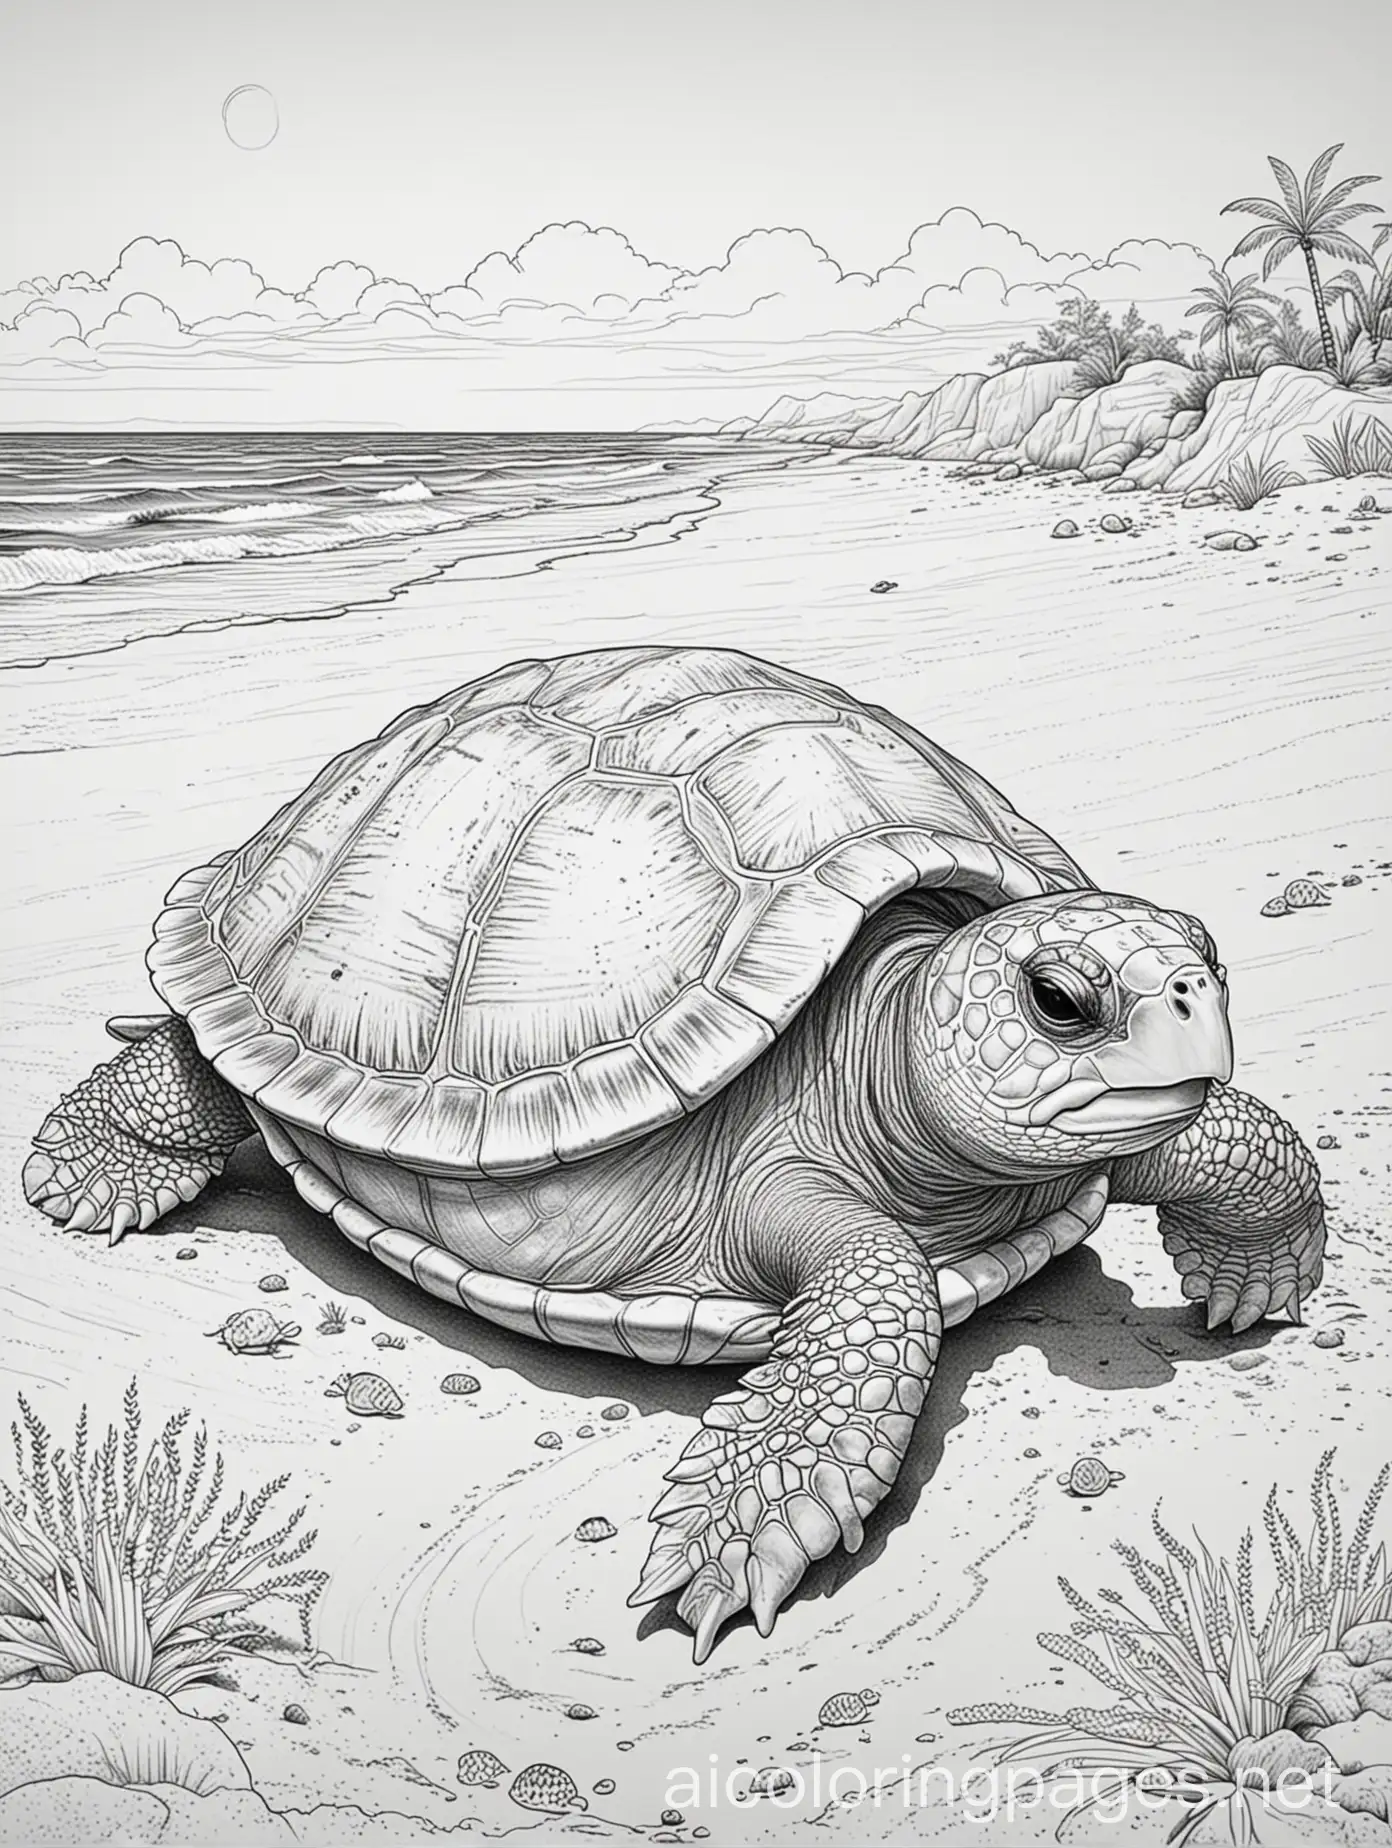 turtle laying on the beach in the sand not scary for coloring book children 5 and above, Coloring Page, black and white, white background, Simplicity, Ample White Space. The background of the coloring page is plain white to make it easy for young children to color within the lines. The outlines of all the subjects are easy to distinguish, making it simple for kids to color without too much difficulty, Coloring Page, black and white, line art, white background, Simplicity, Ample White Space. The background of the coloring page is plain white to make it easy for young children to color within the lines. The outlines of all the subjects are easy to distinguish, making it simple for kids to color without too much difficulty